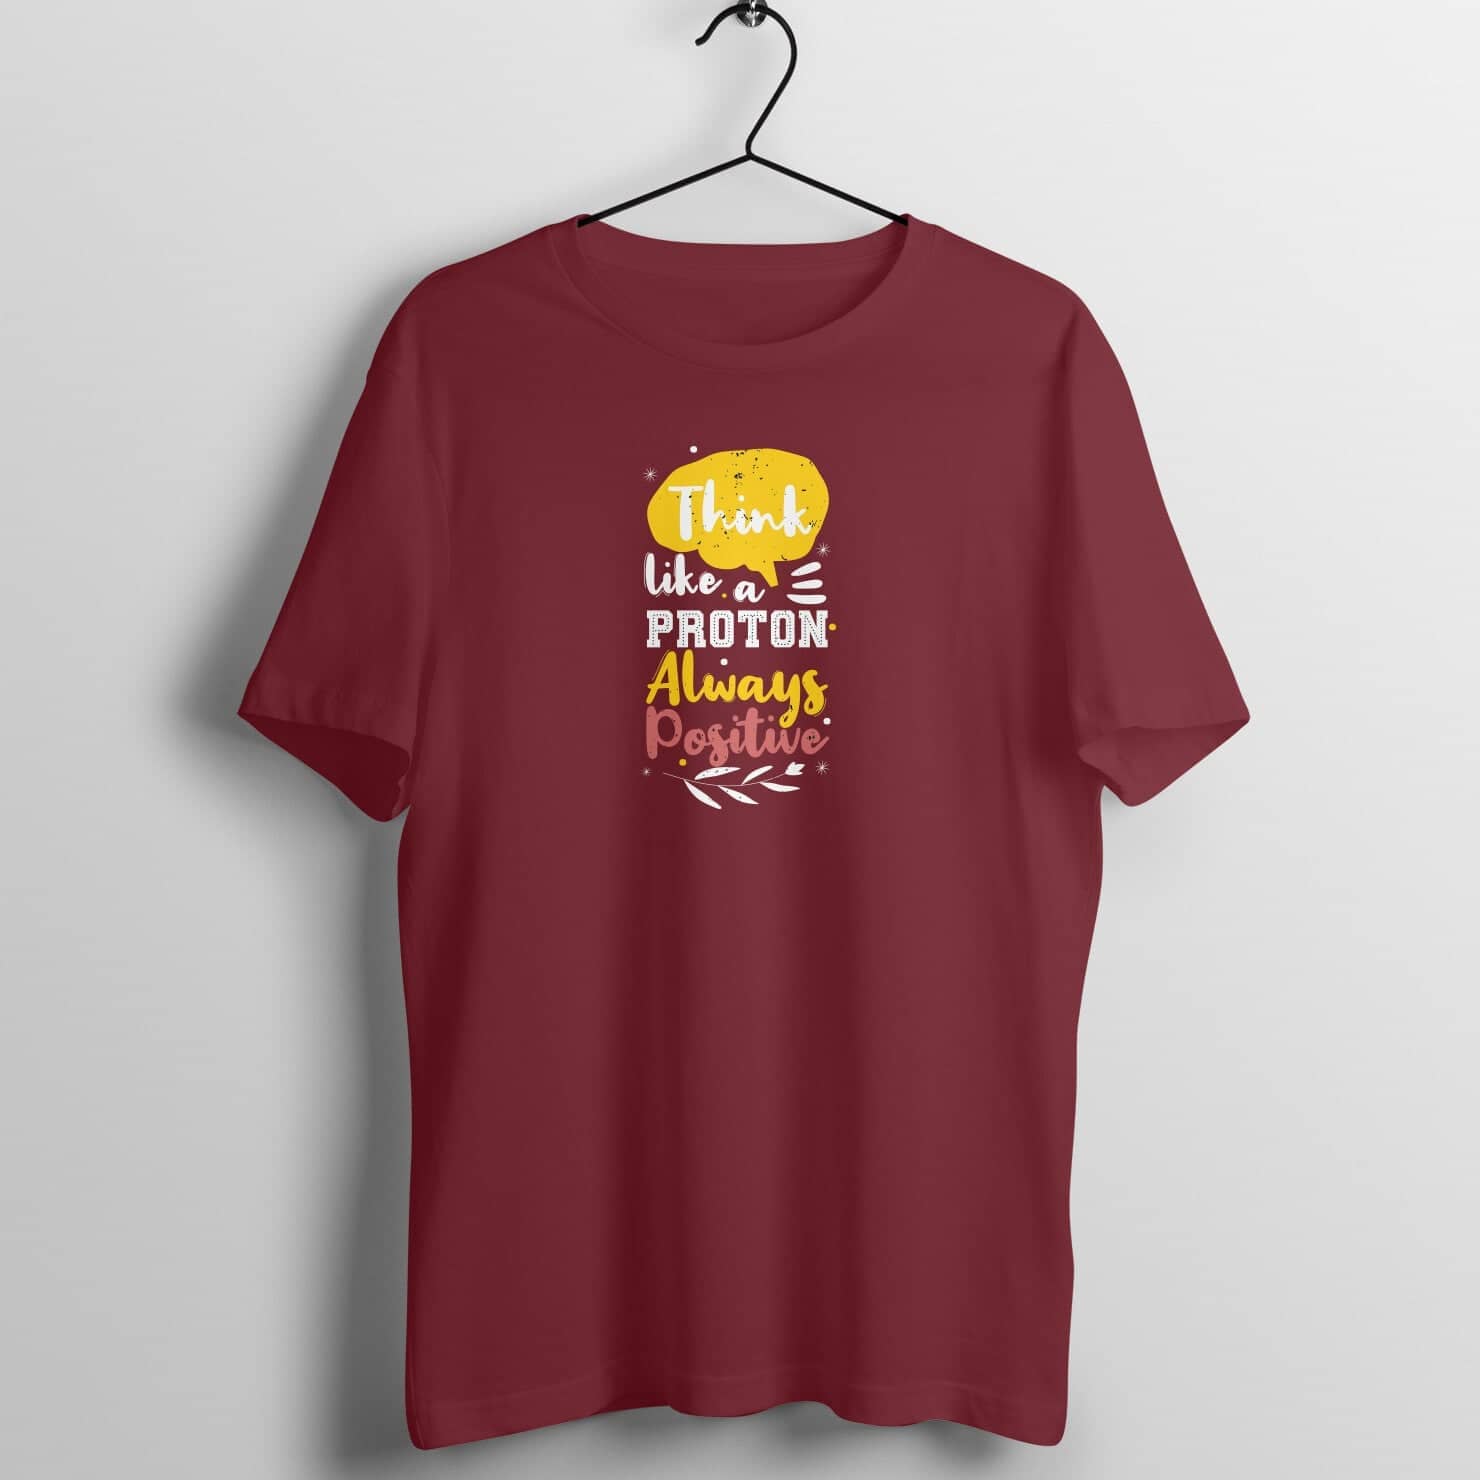 Think Like a Proton Always Positive Special Positivity T Shirt for Men and Women freeshipping - Catch My Drift India